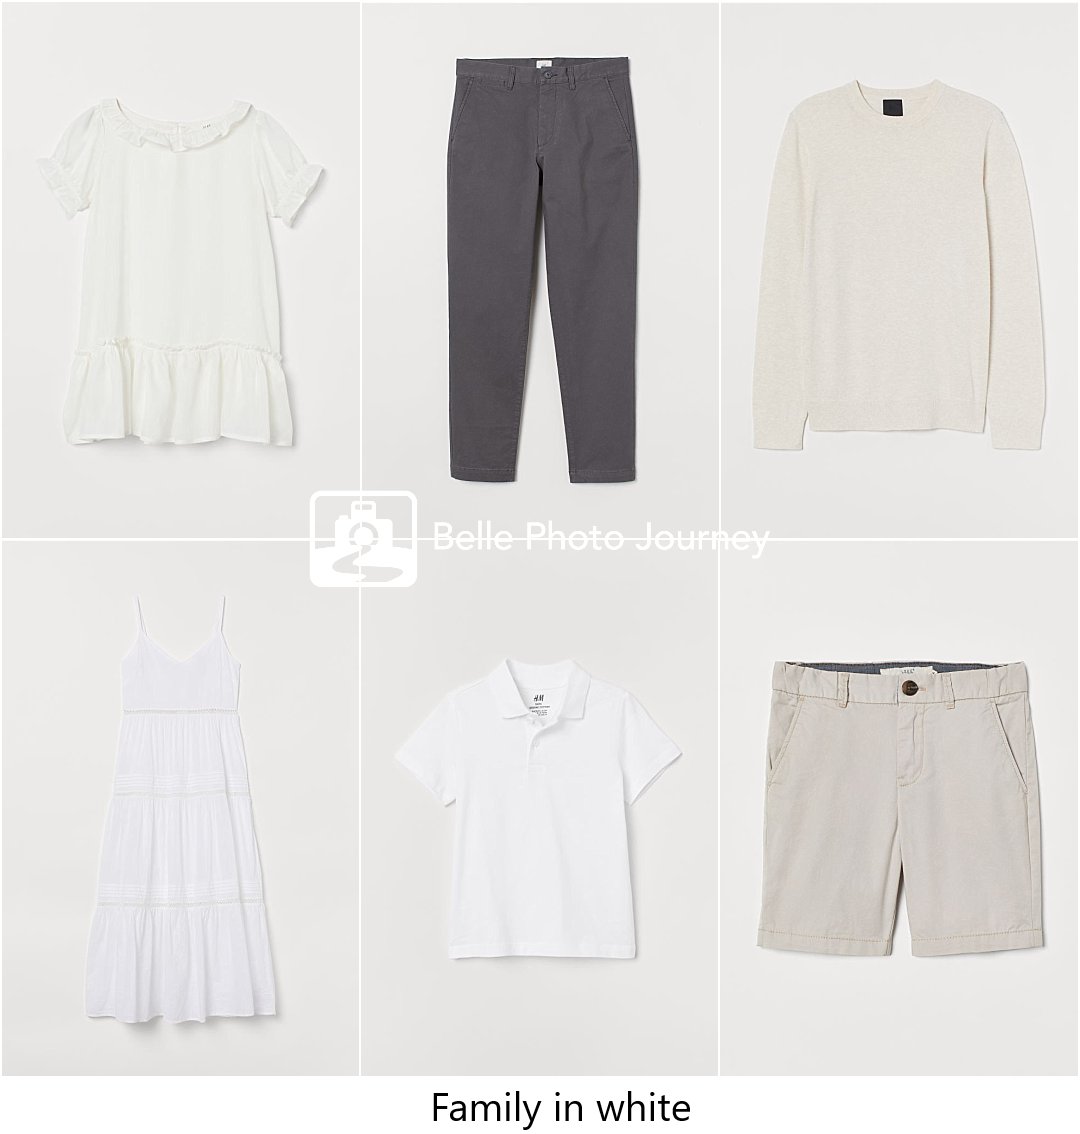 White clothes for family portraits